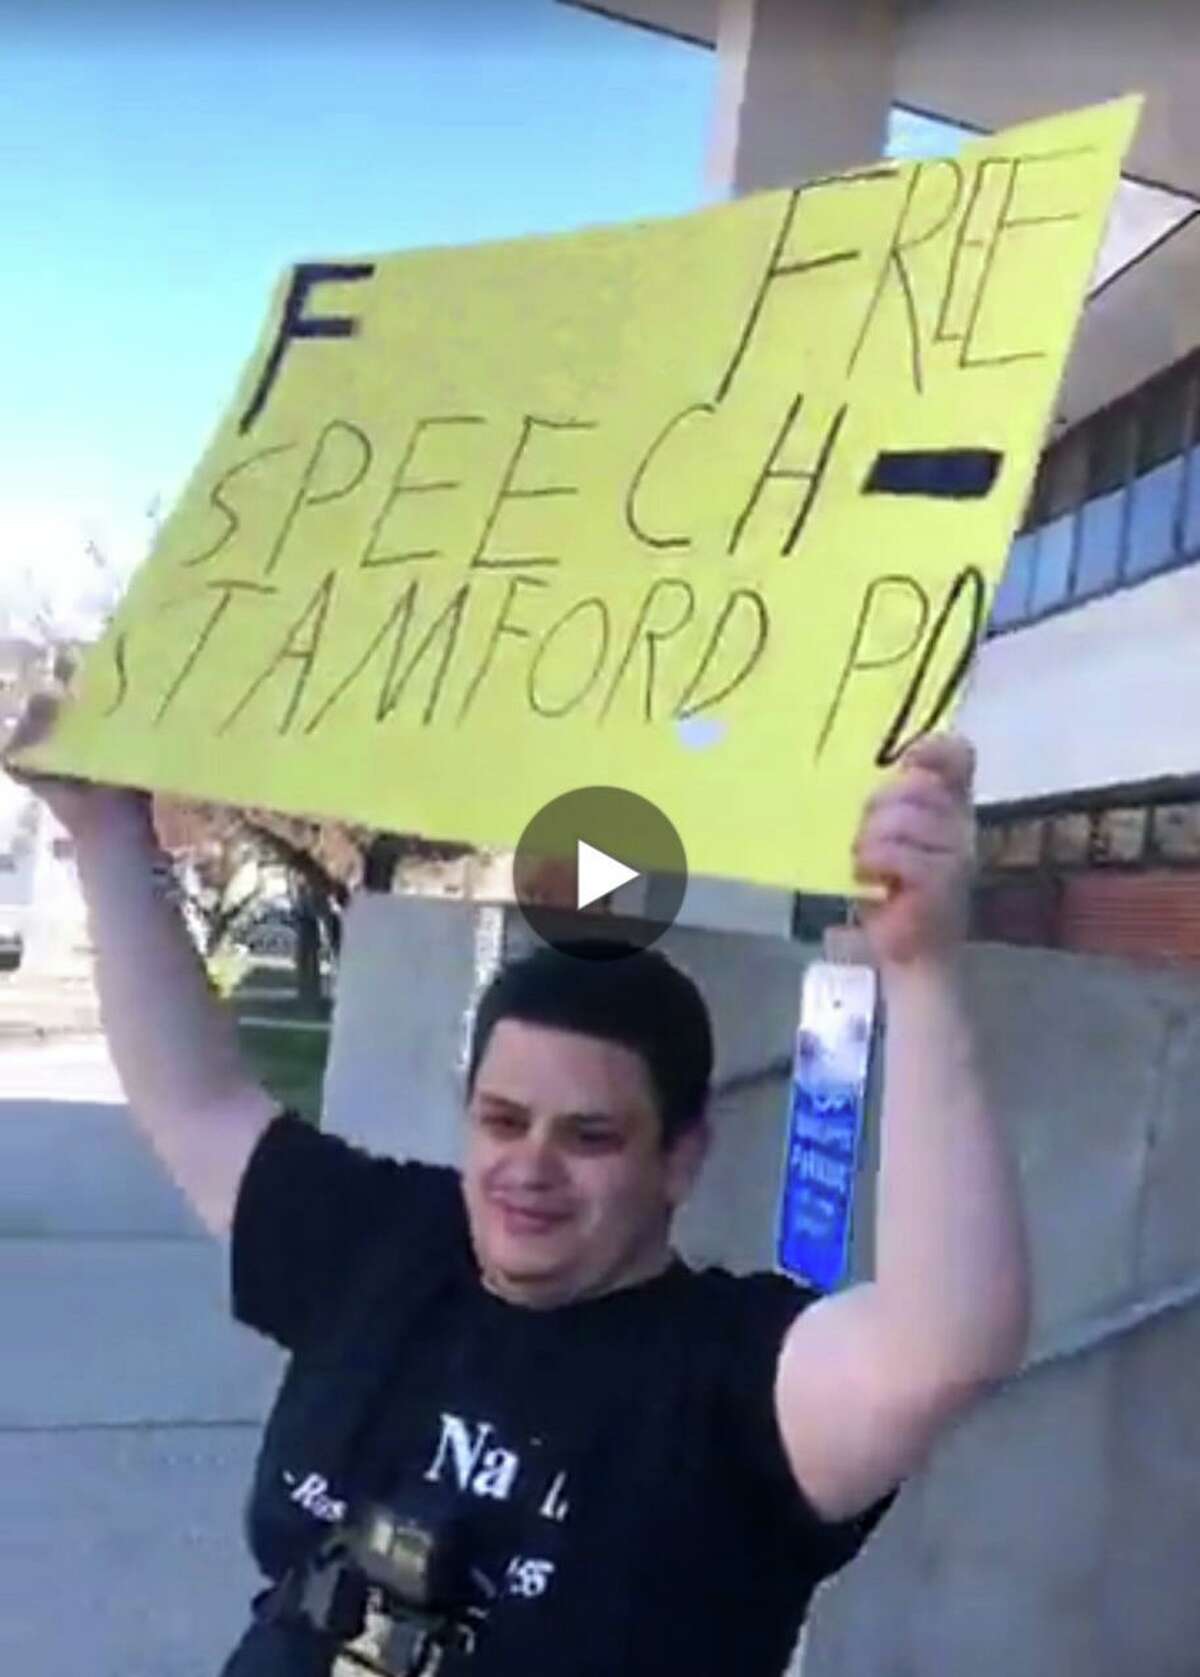 NOTE: photo has been altered to take out offensive language. Michael Picard held a sign outside the Stamford courthouse and the police department Thursday, April 26, 2018 in protest of a friend's arrest for interfering with a distracted driving checkpoint.